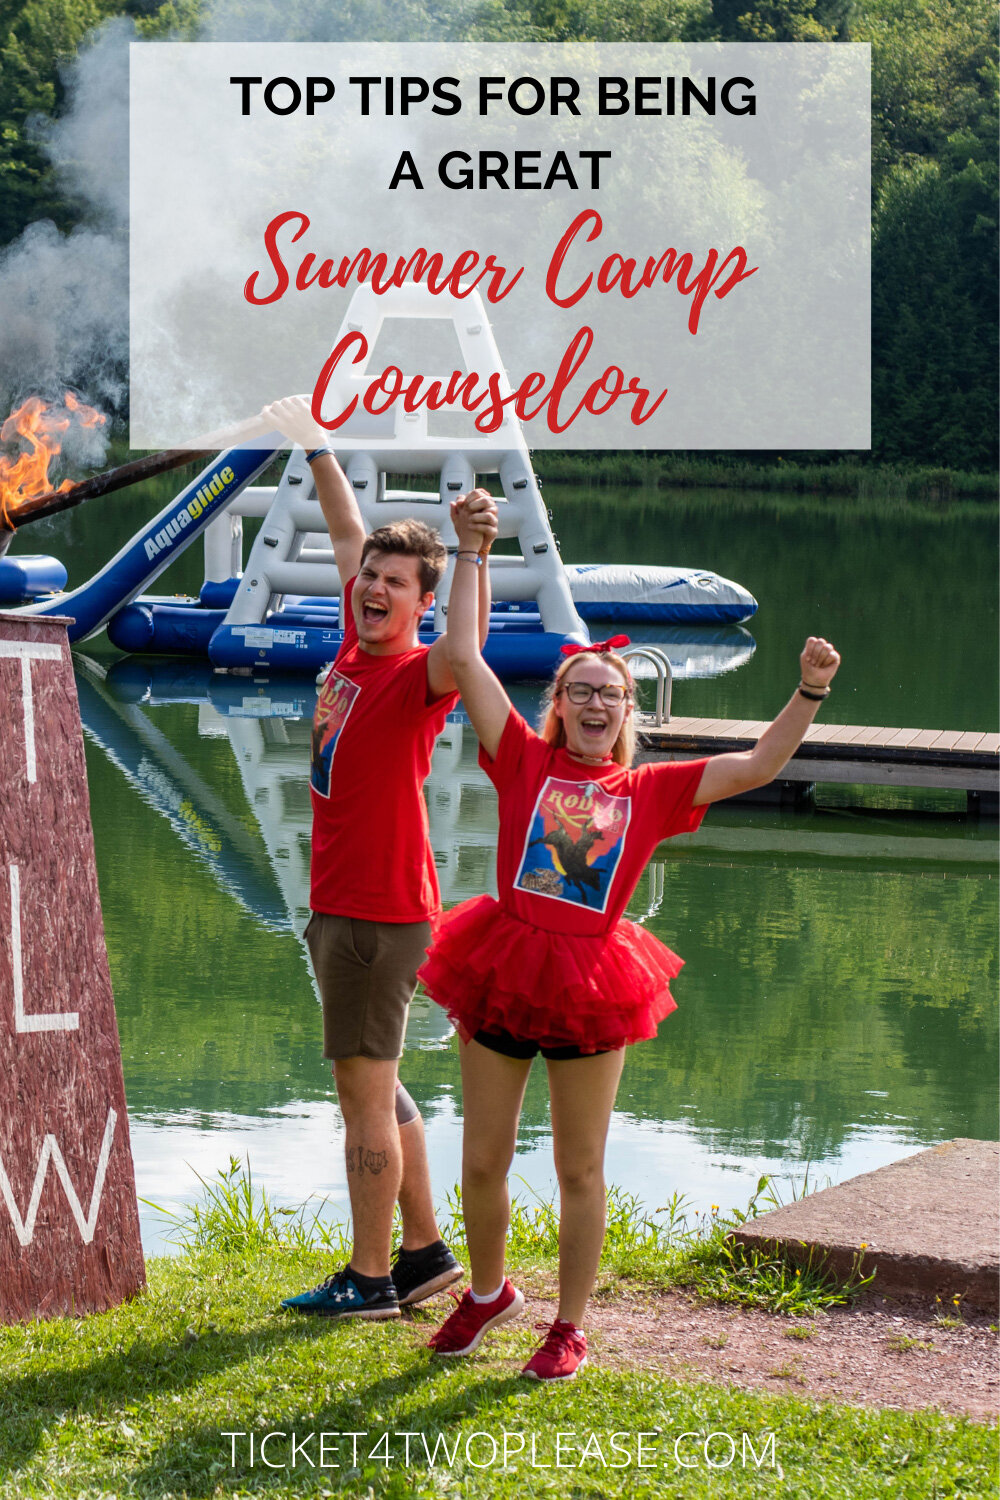 How To Be A Great Camp Counselor Artistrestaurant2